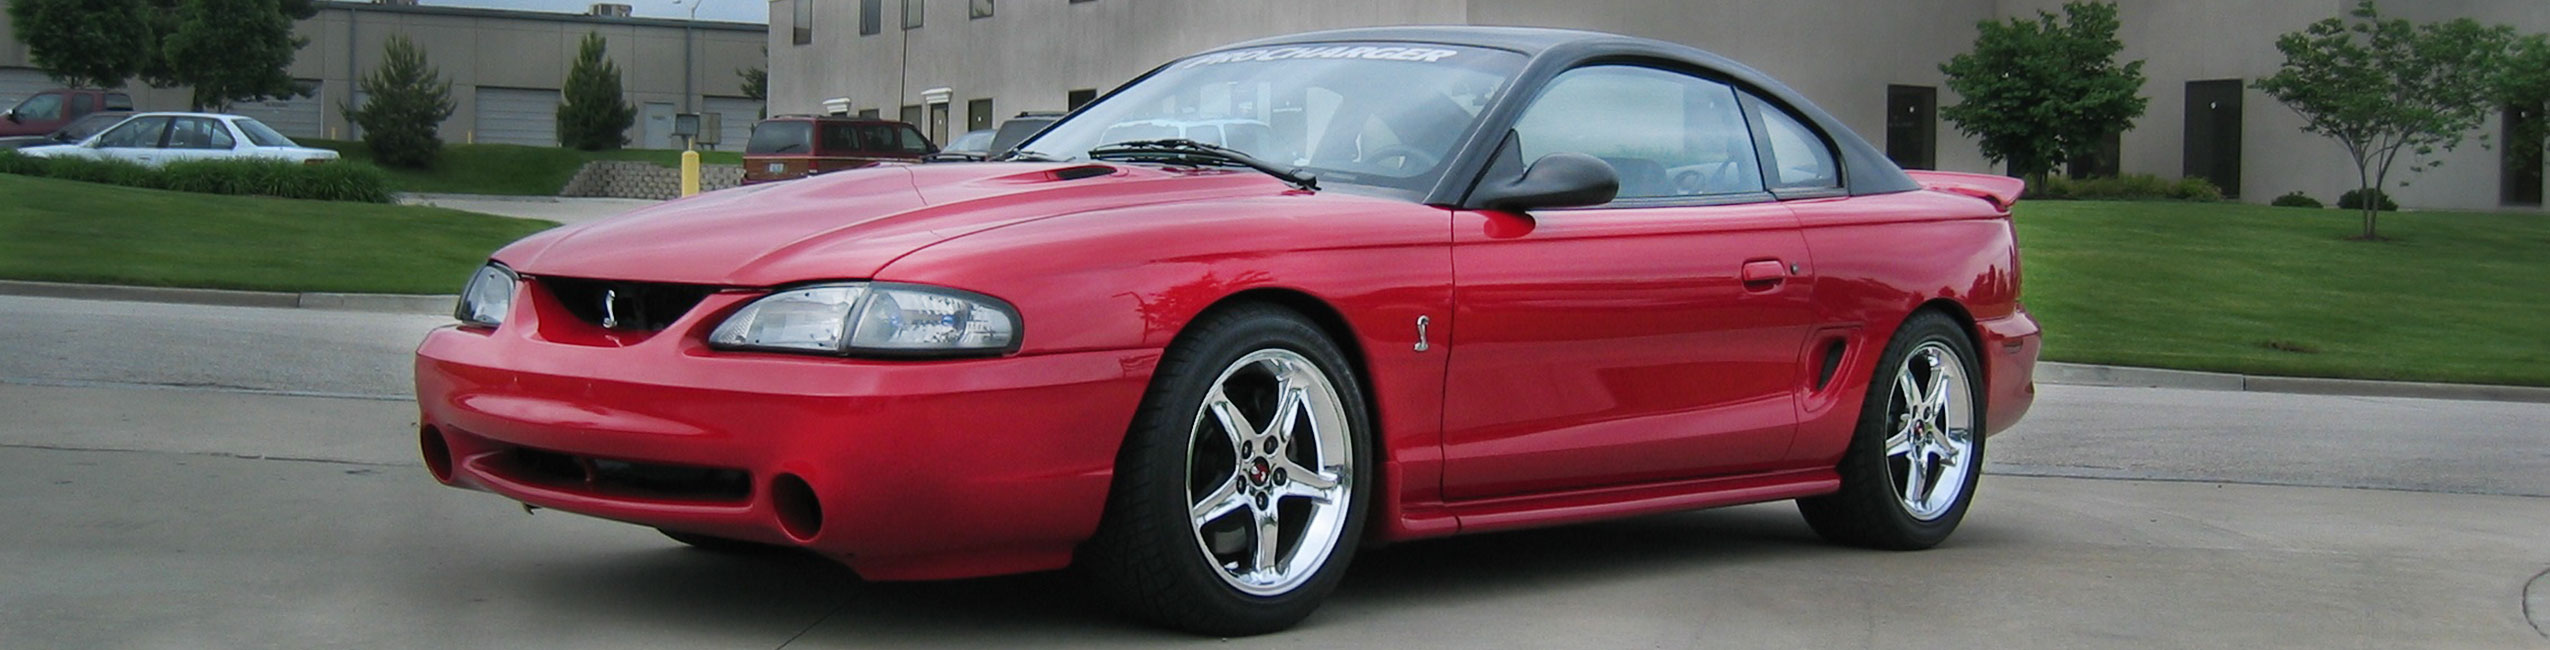 2003 Ford Mustang Cobra with supercharger